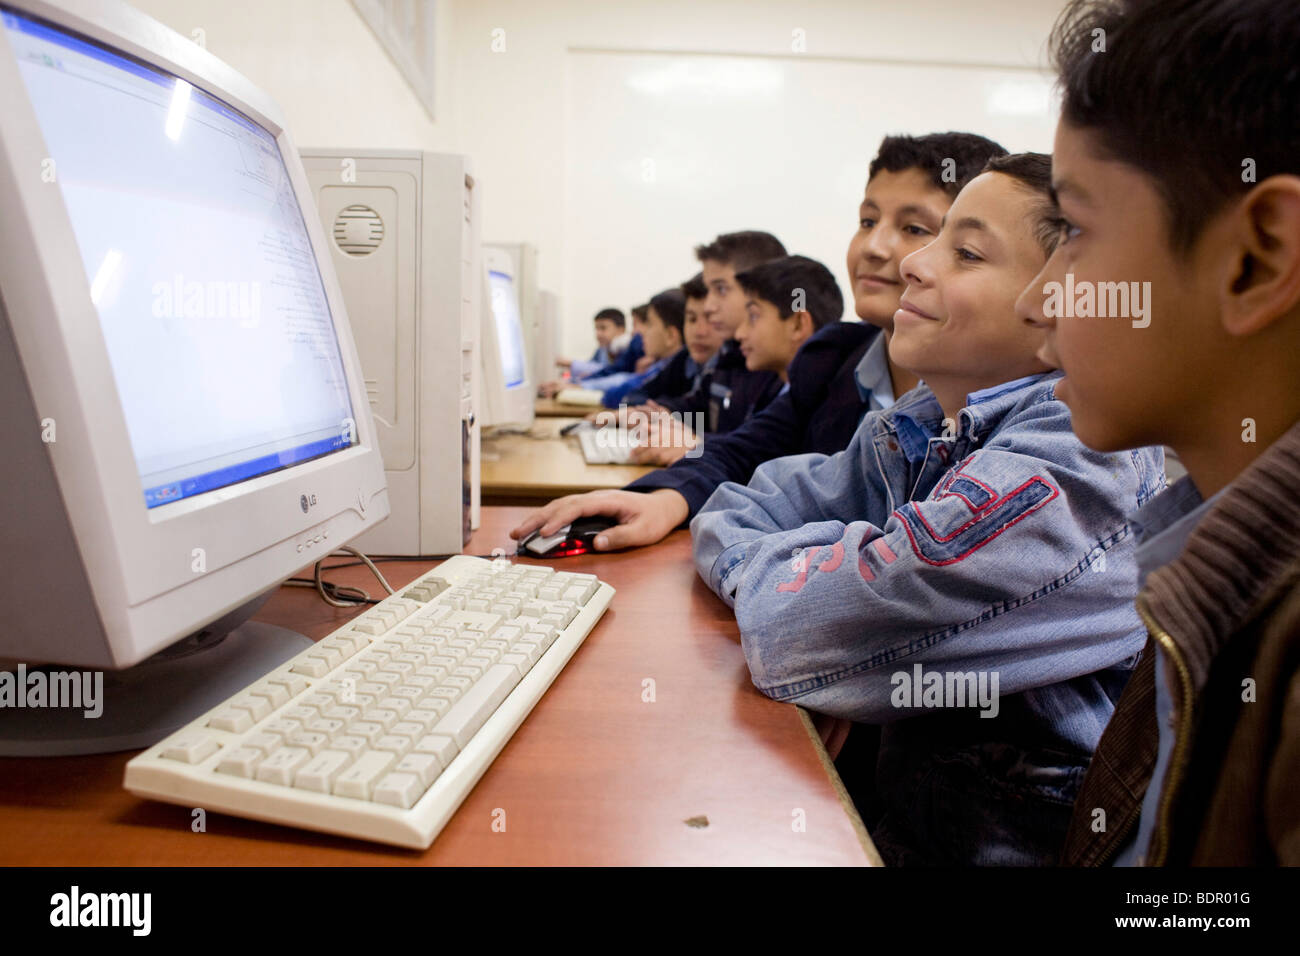 Students using computer at school. Stock Photo